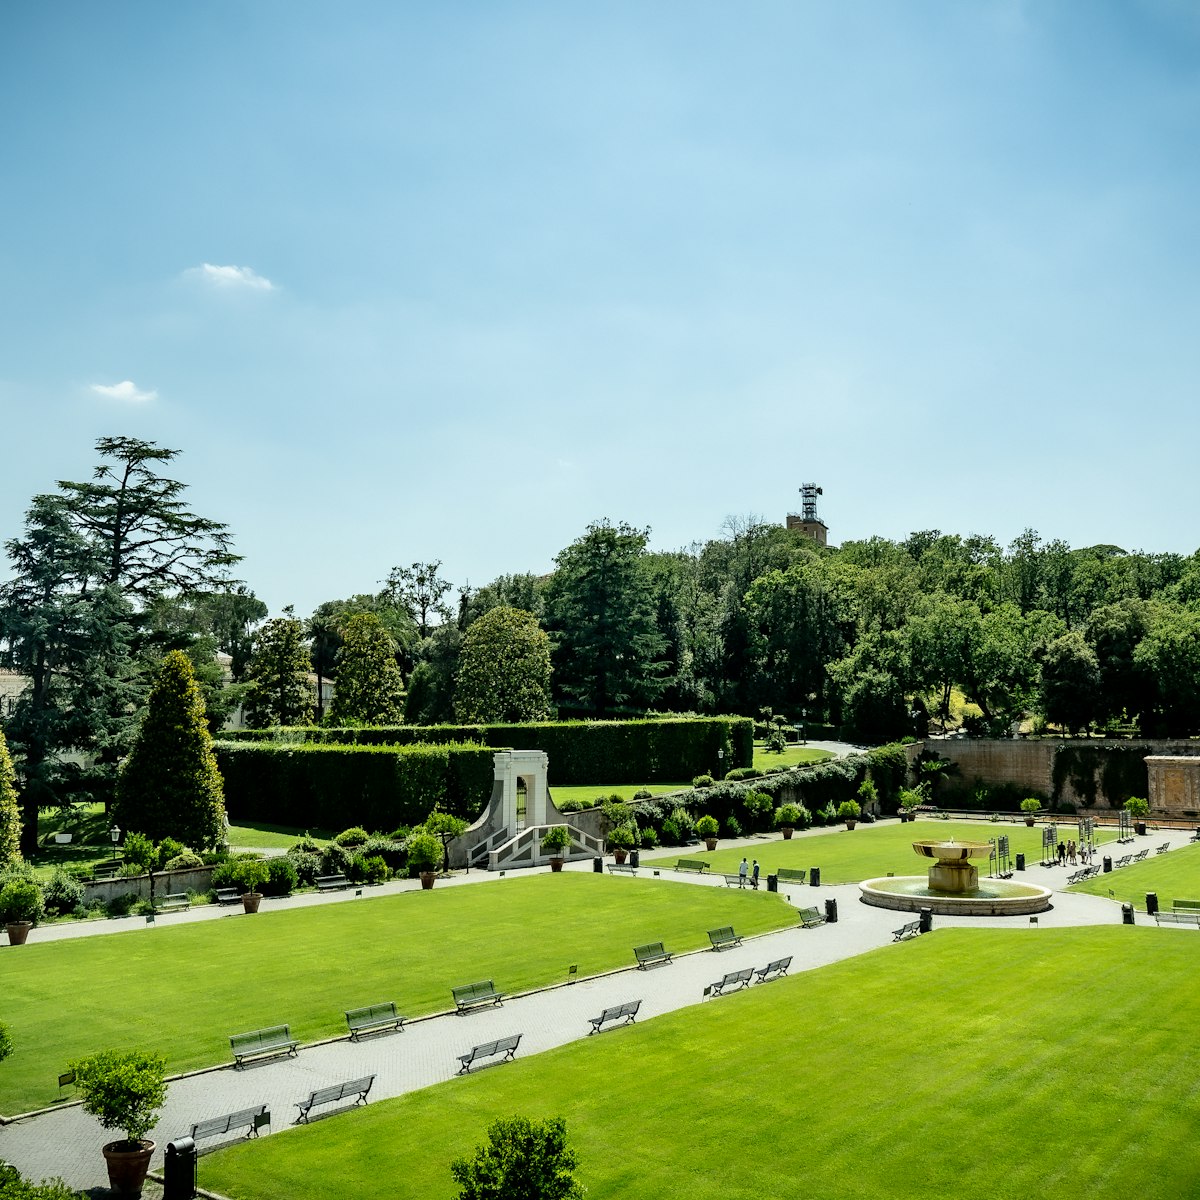 View of Vatican gardens on a sunny summer day. The square garden with green lawn, benches and trees